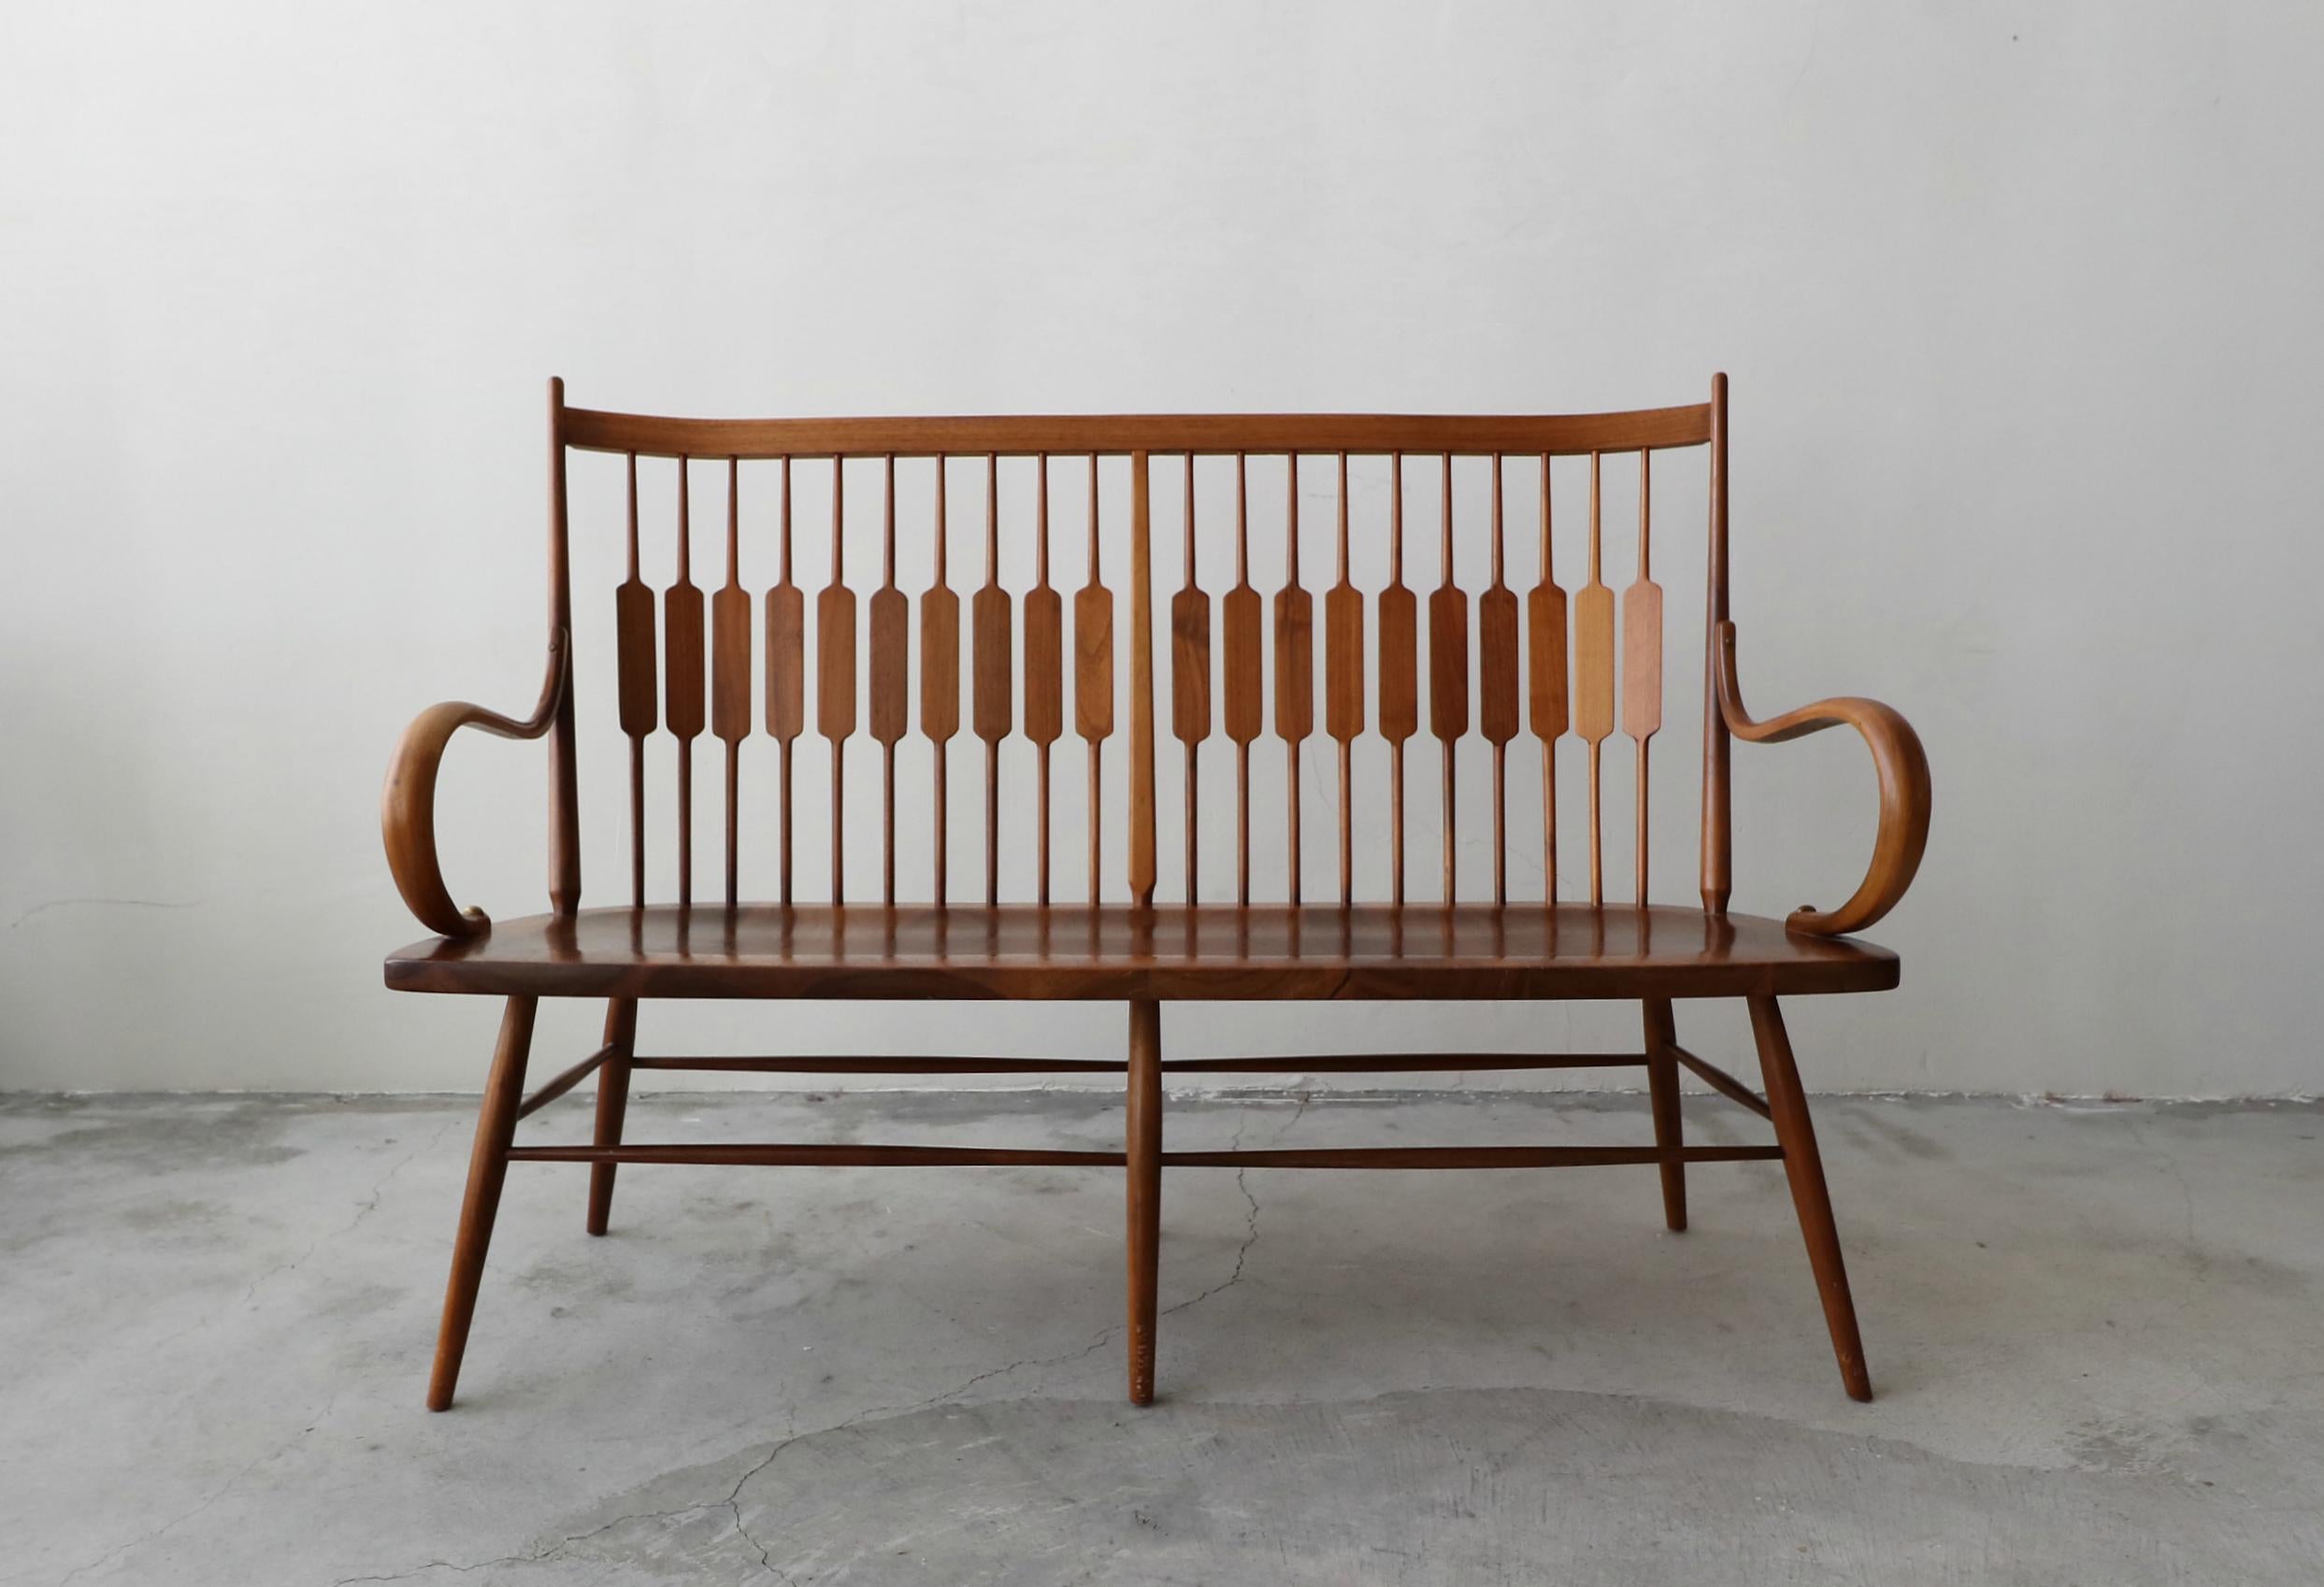 Beautiful midcentury spindle back bench designed by Kipp Stewart and Stewart MacDougall for Drexel Furniture. Bench is constructed of slid walnut. It is in excellent condition with no damage to be noted.